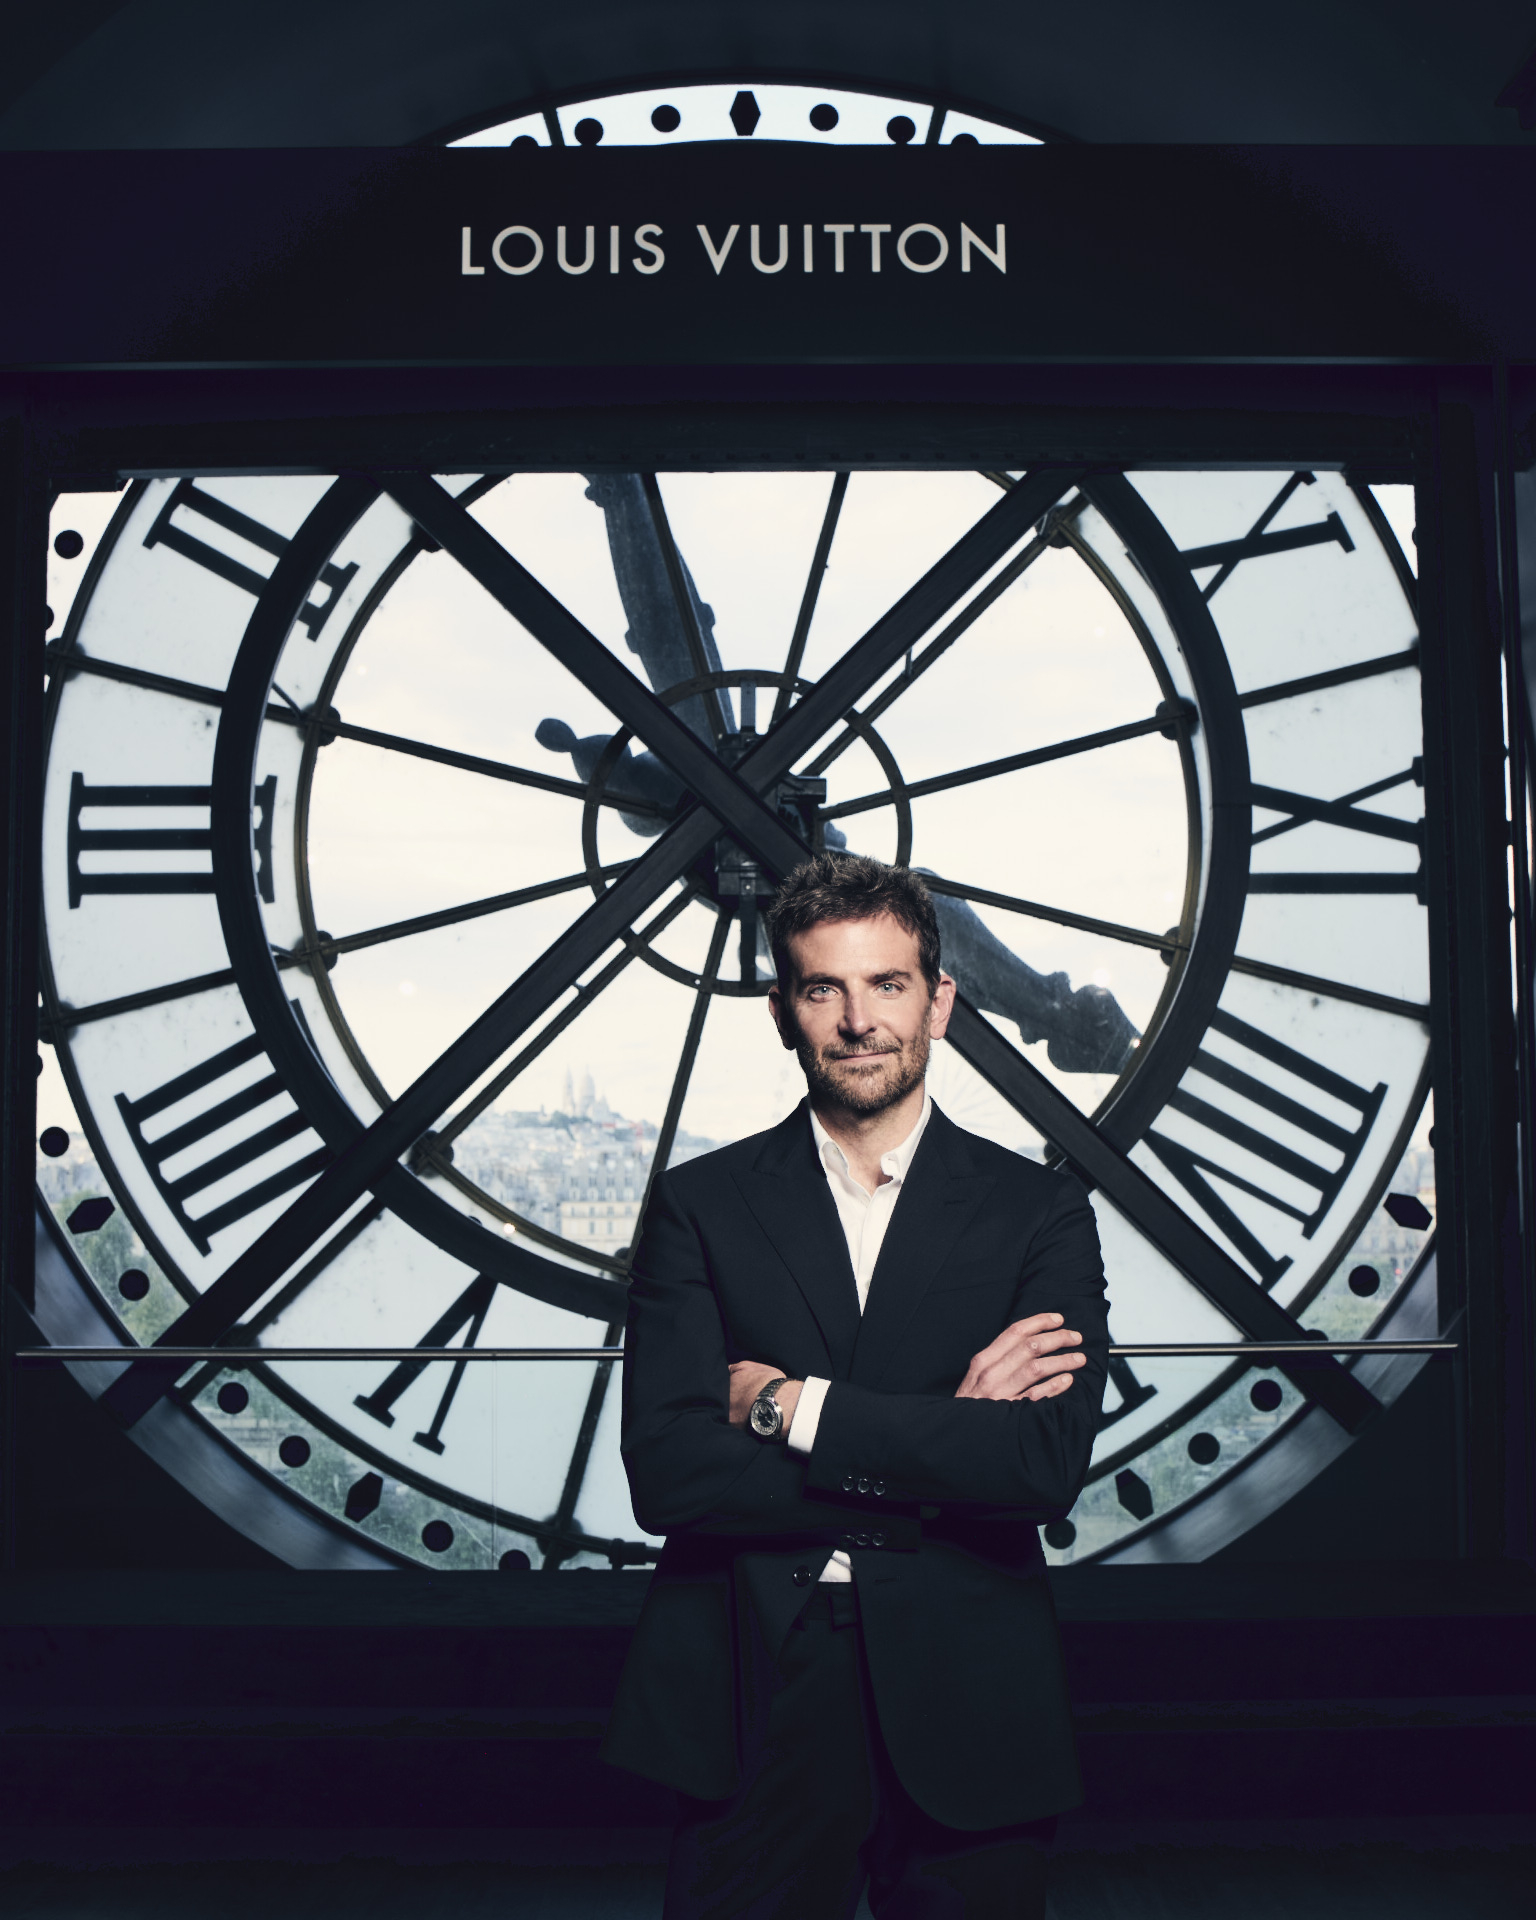 Bradley Cooper is the New Face of Louis Vuitton's Tambour